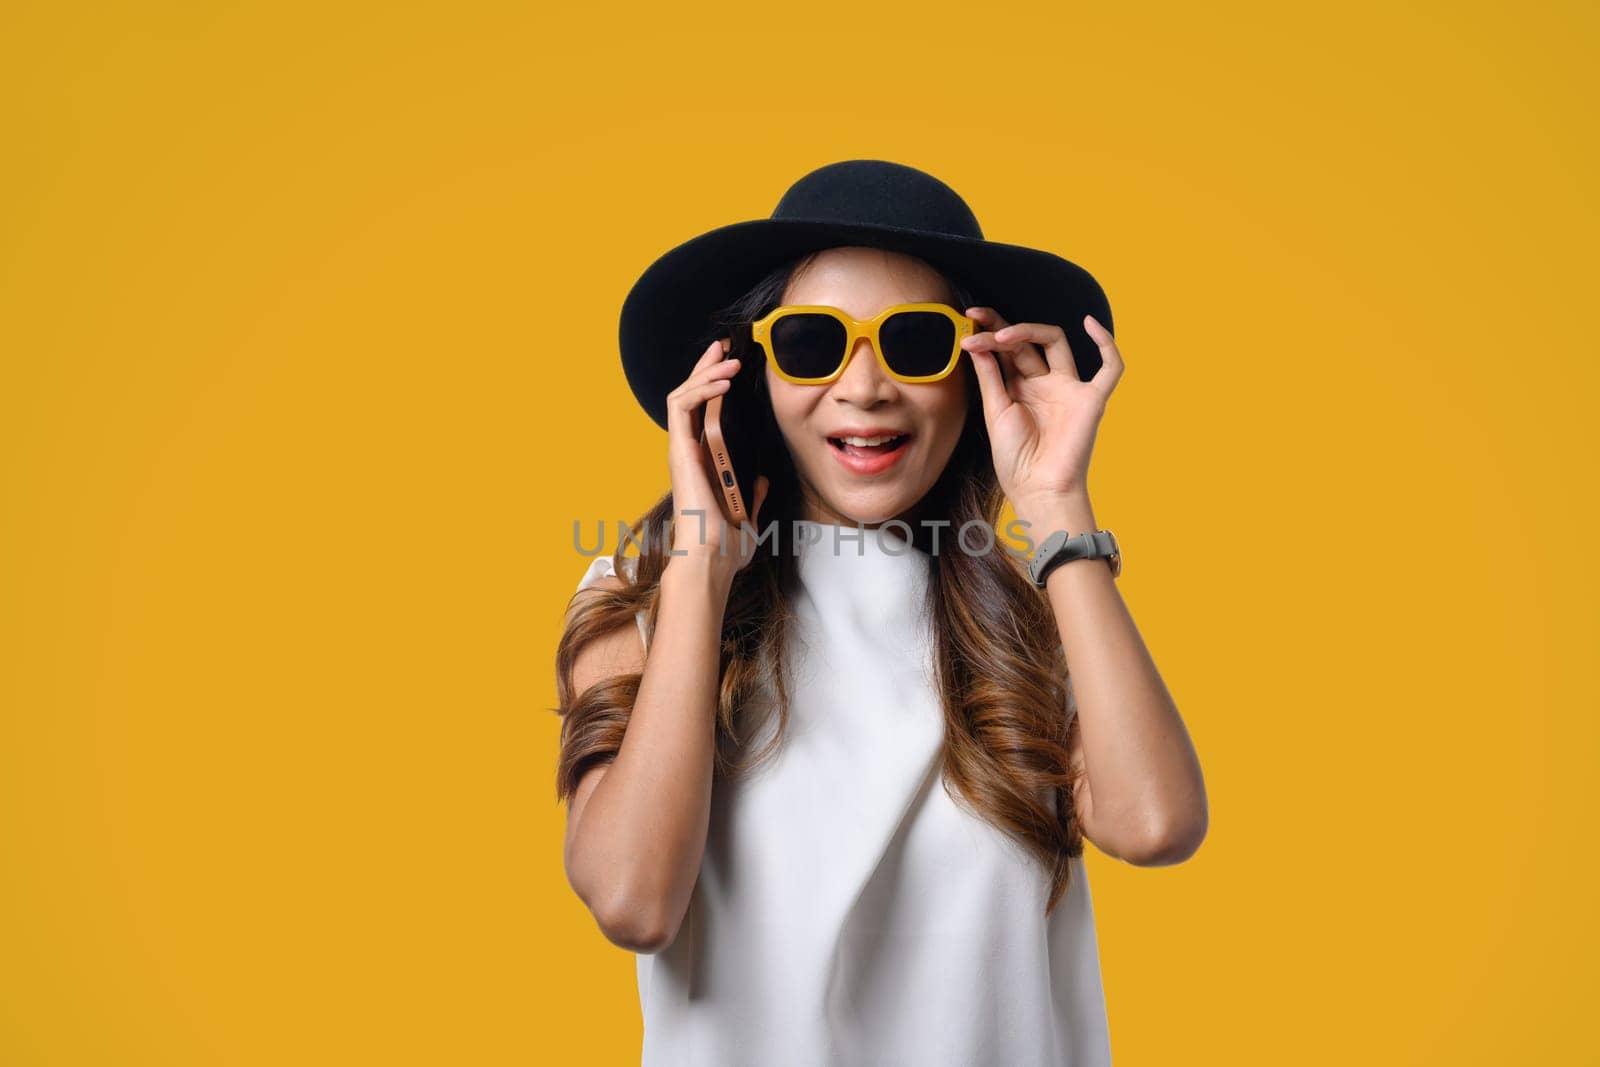 Smiling young woman wearing summer clothing talking on mobile phone isolated on yellow background.